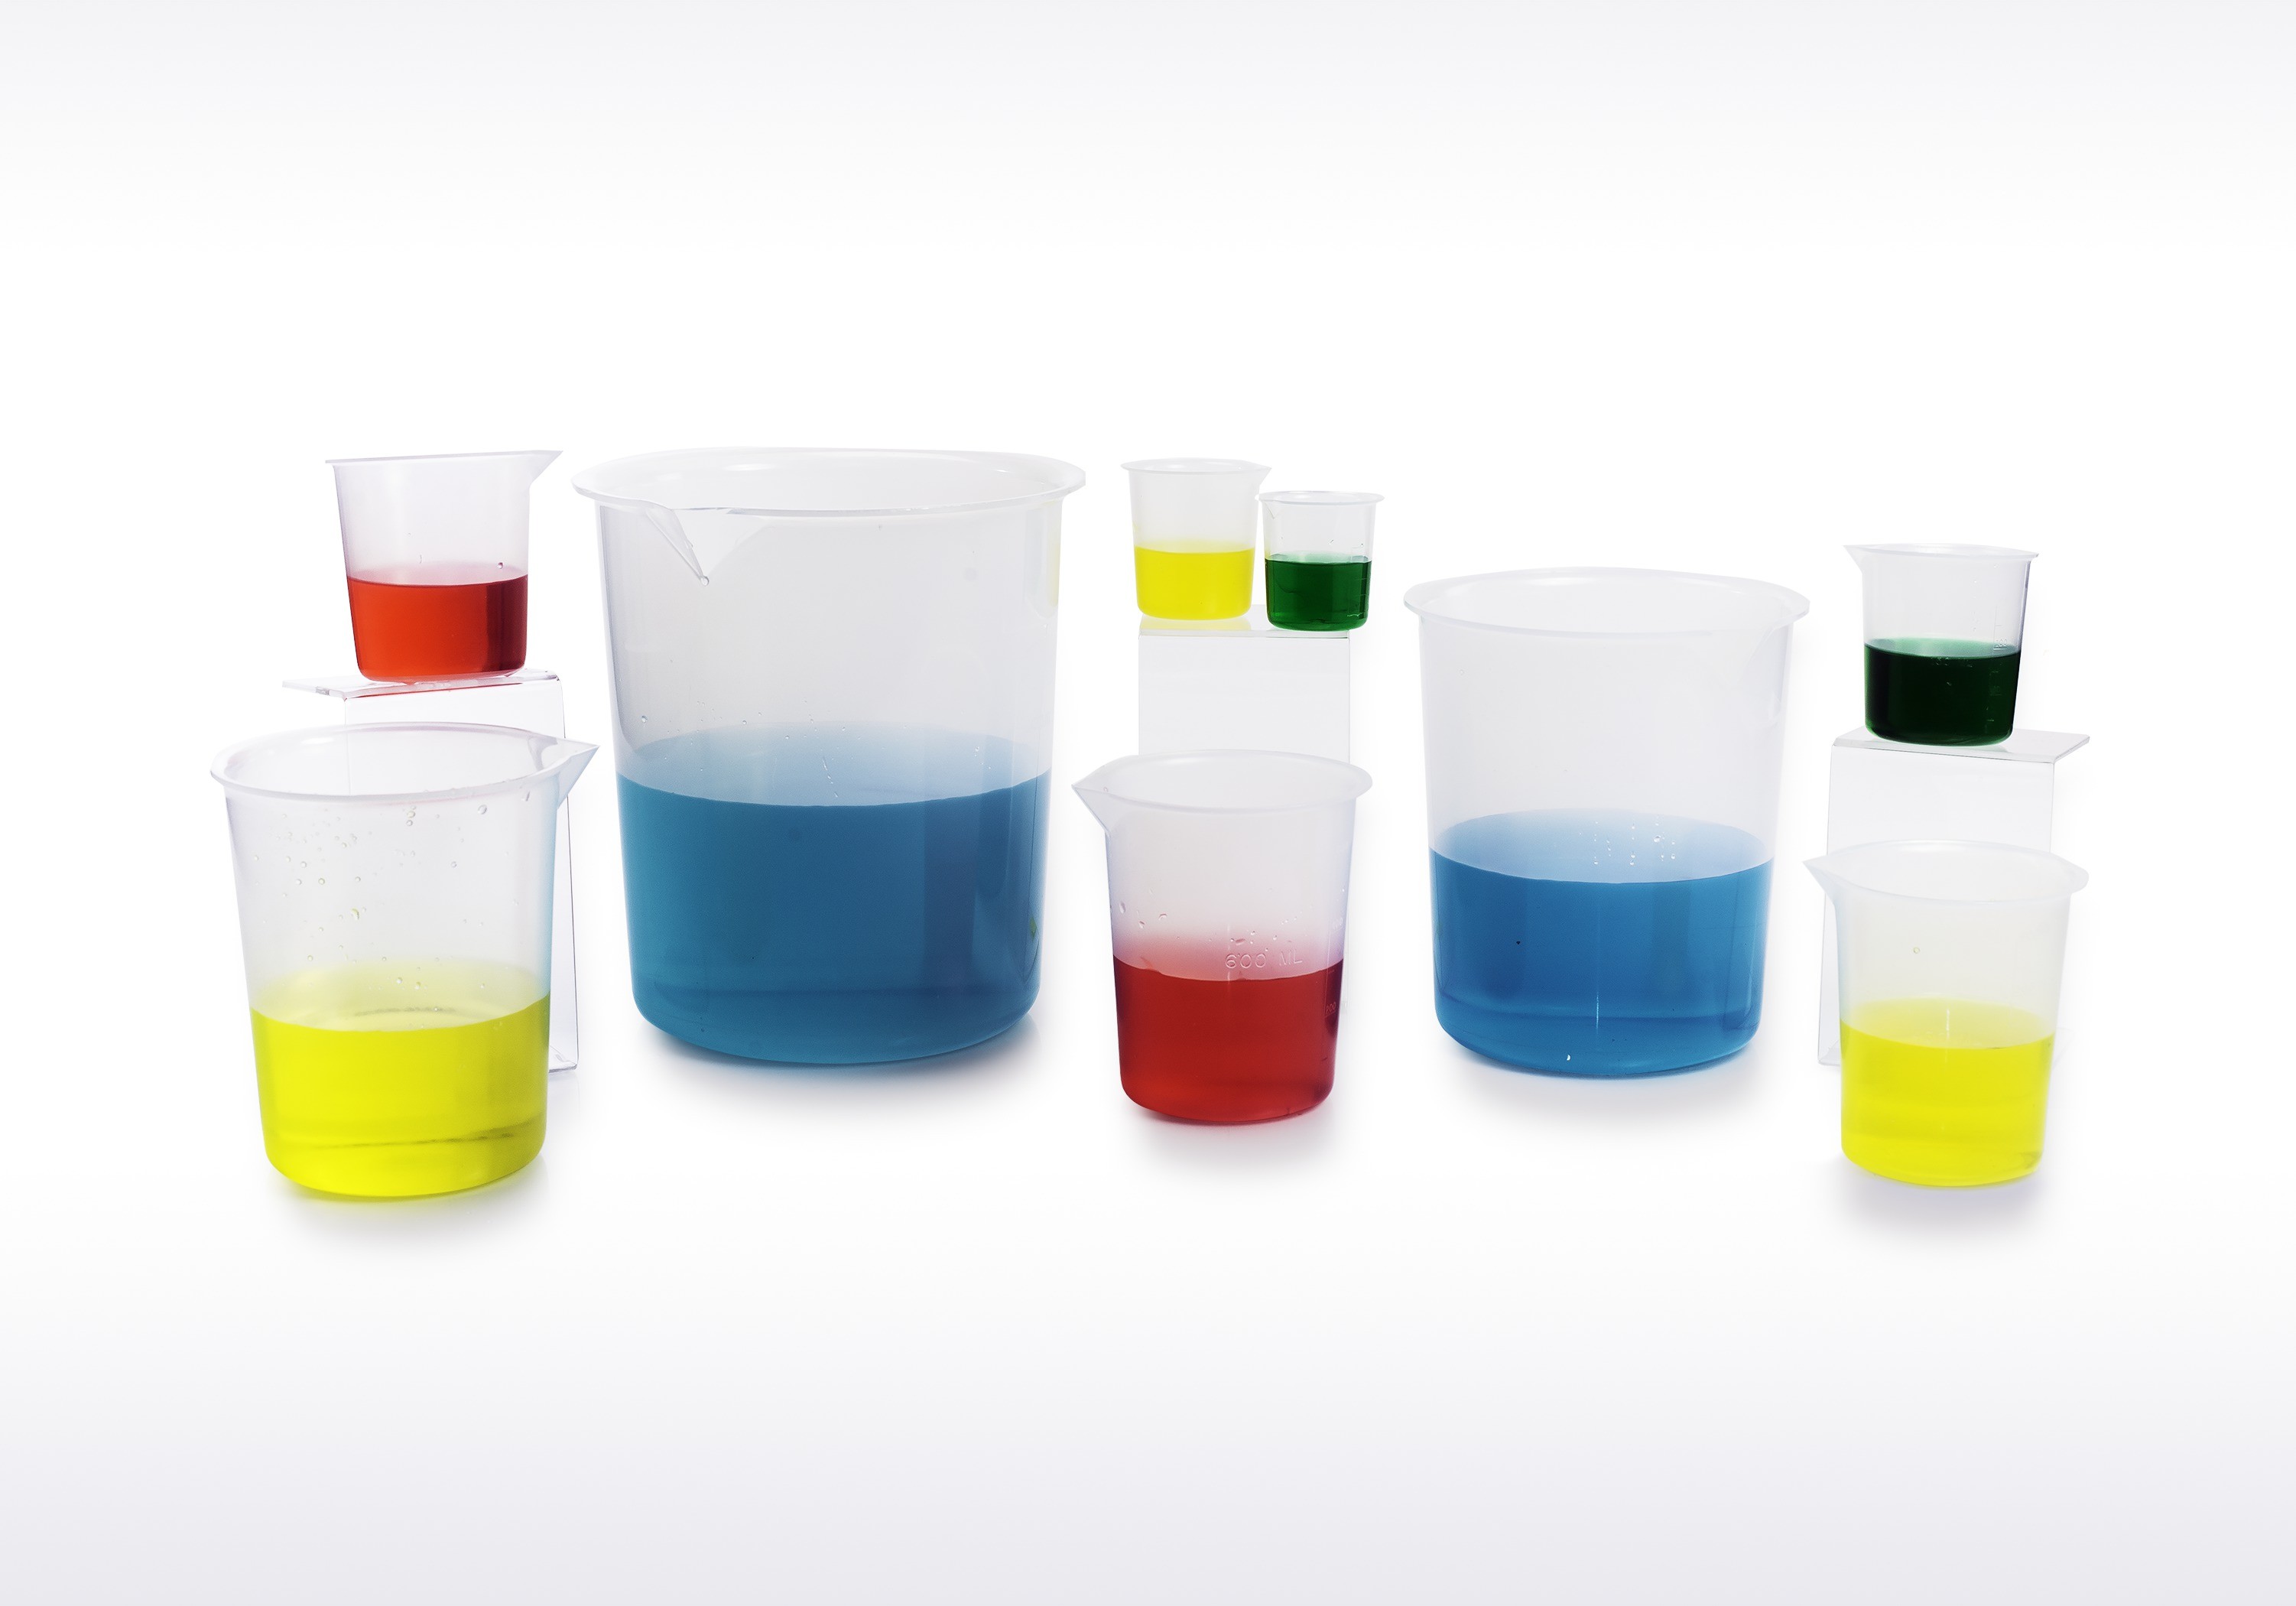 Graduated Griffin Low-Form Beakers